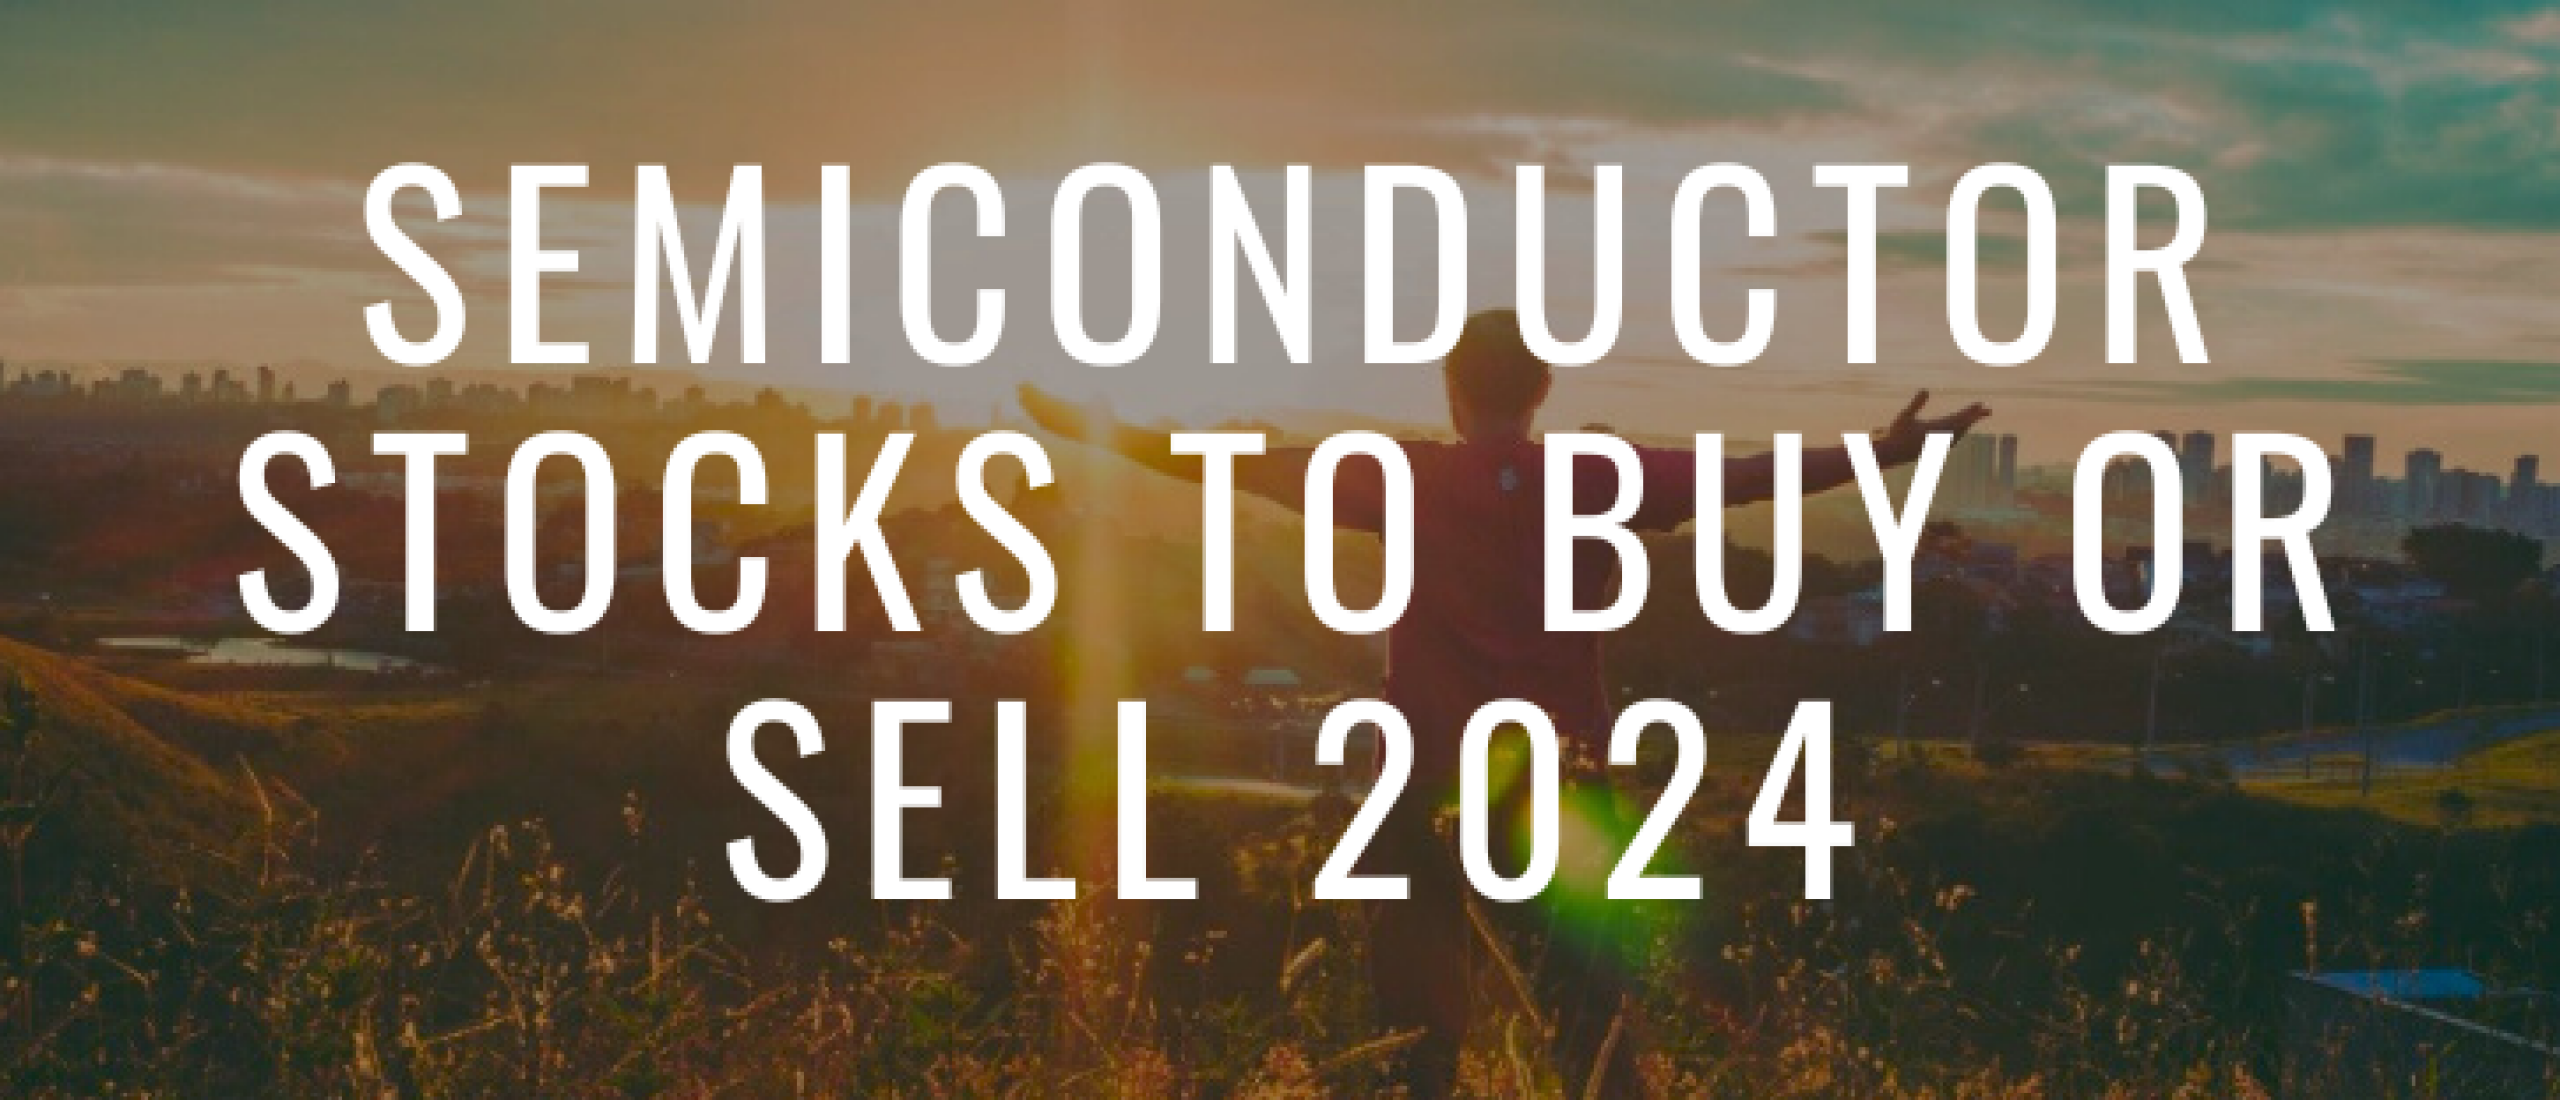 Semiconductor Stocks to Buy or Sell 2024 | Investing in Semiconductor Stocks